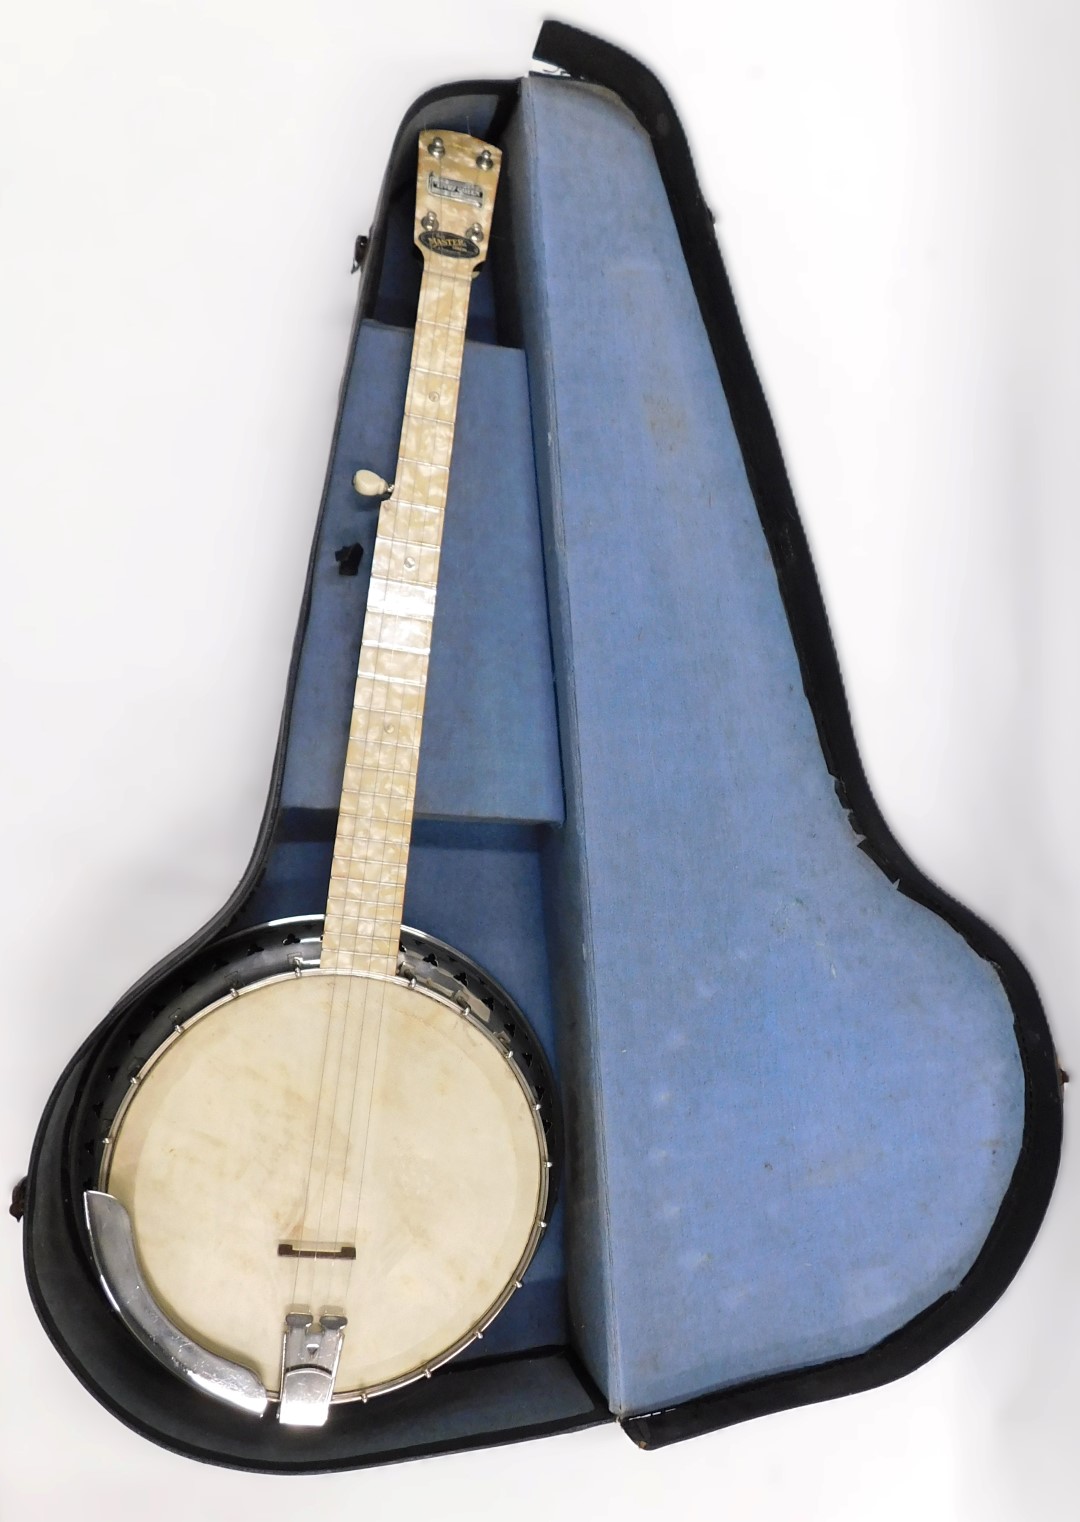 A B&S Master of London Ivory Queen banjo, with a simulated mother of pearl finger board, sides and b - Image 6 of 6